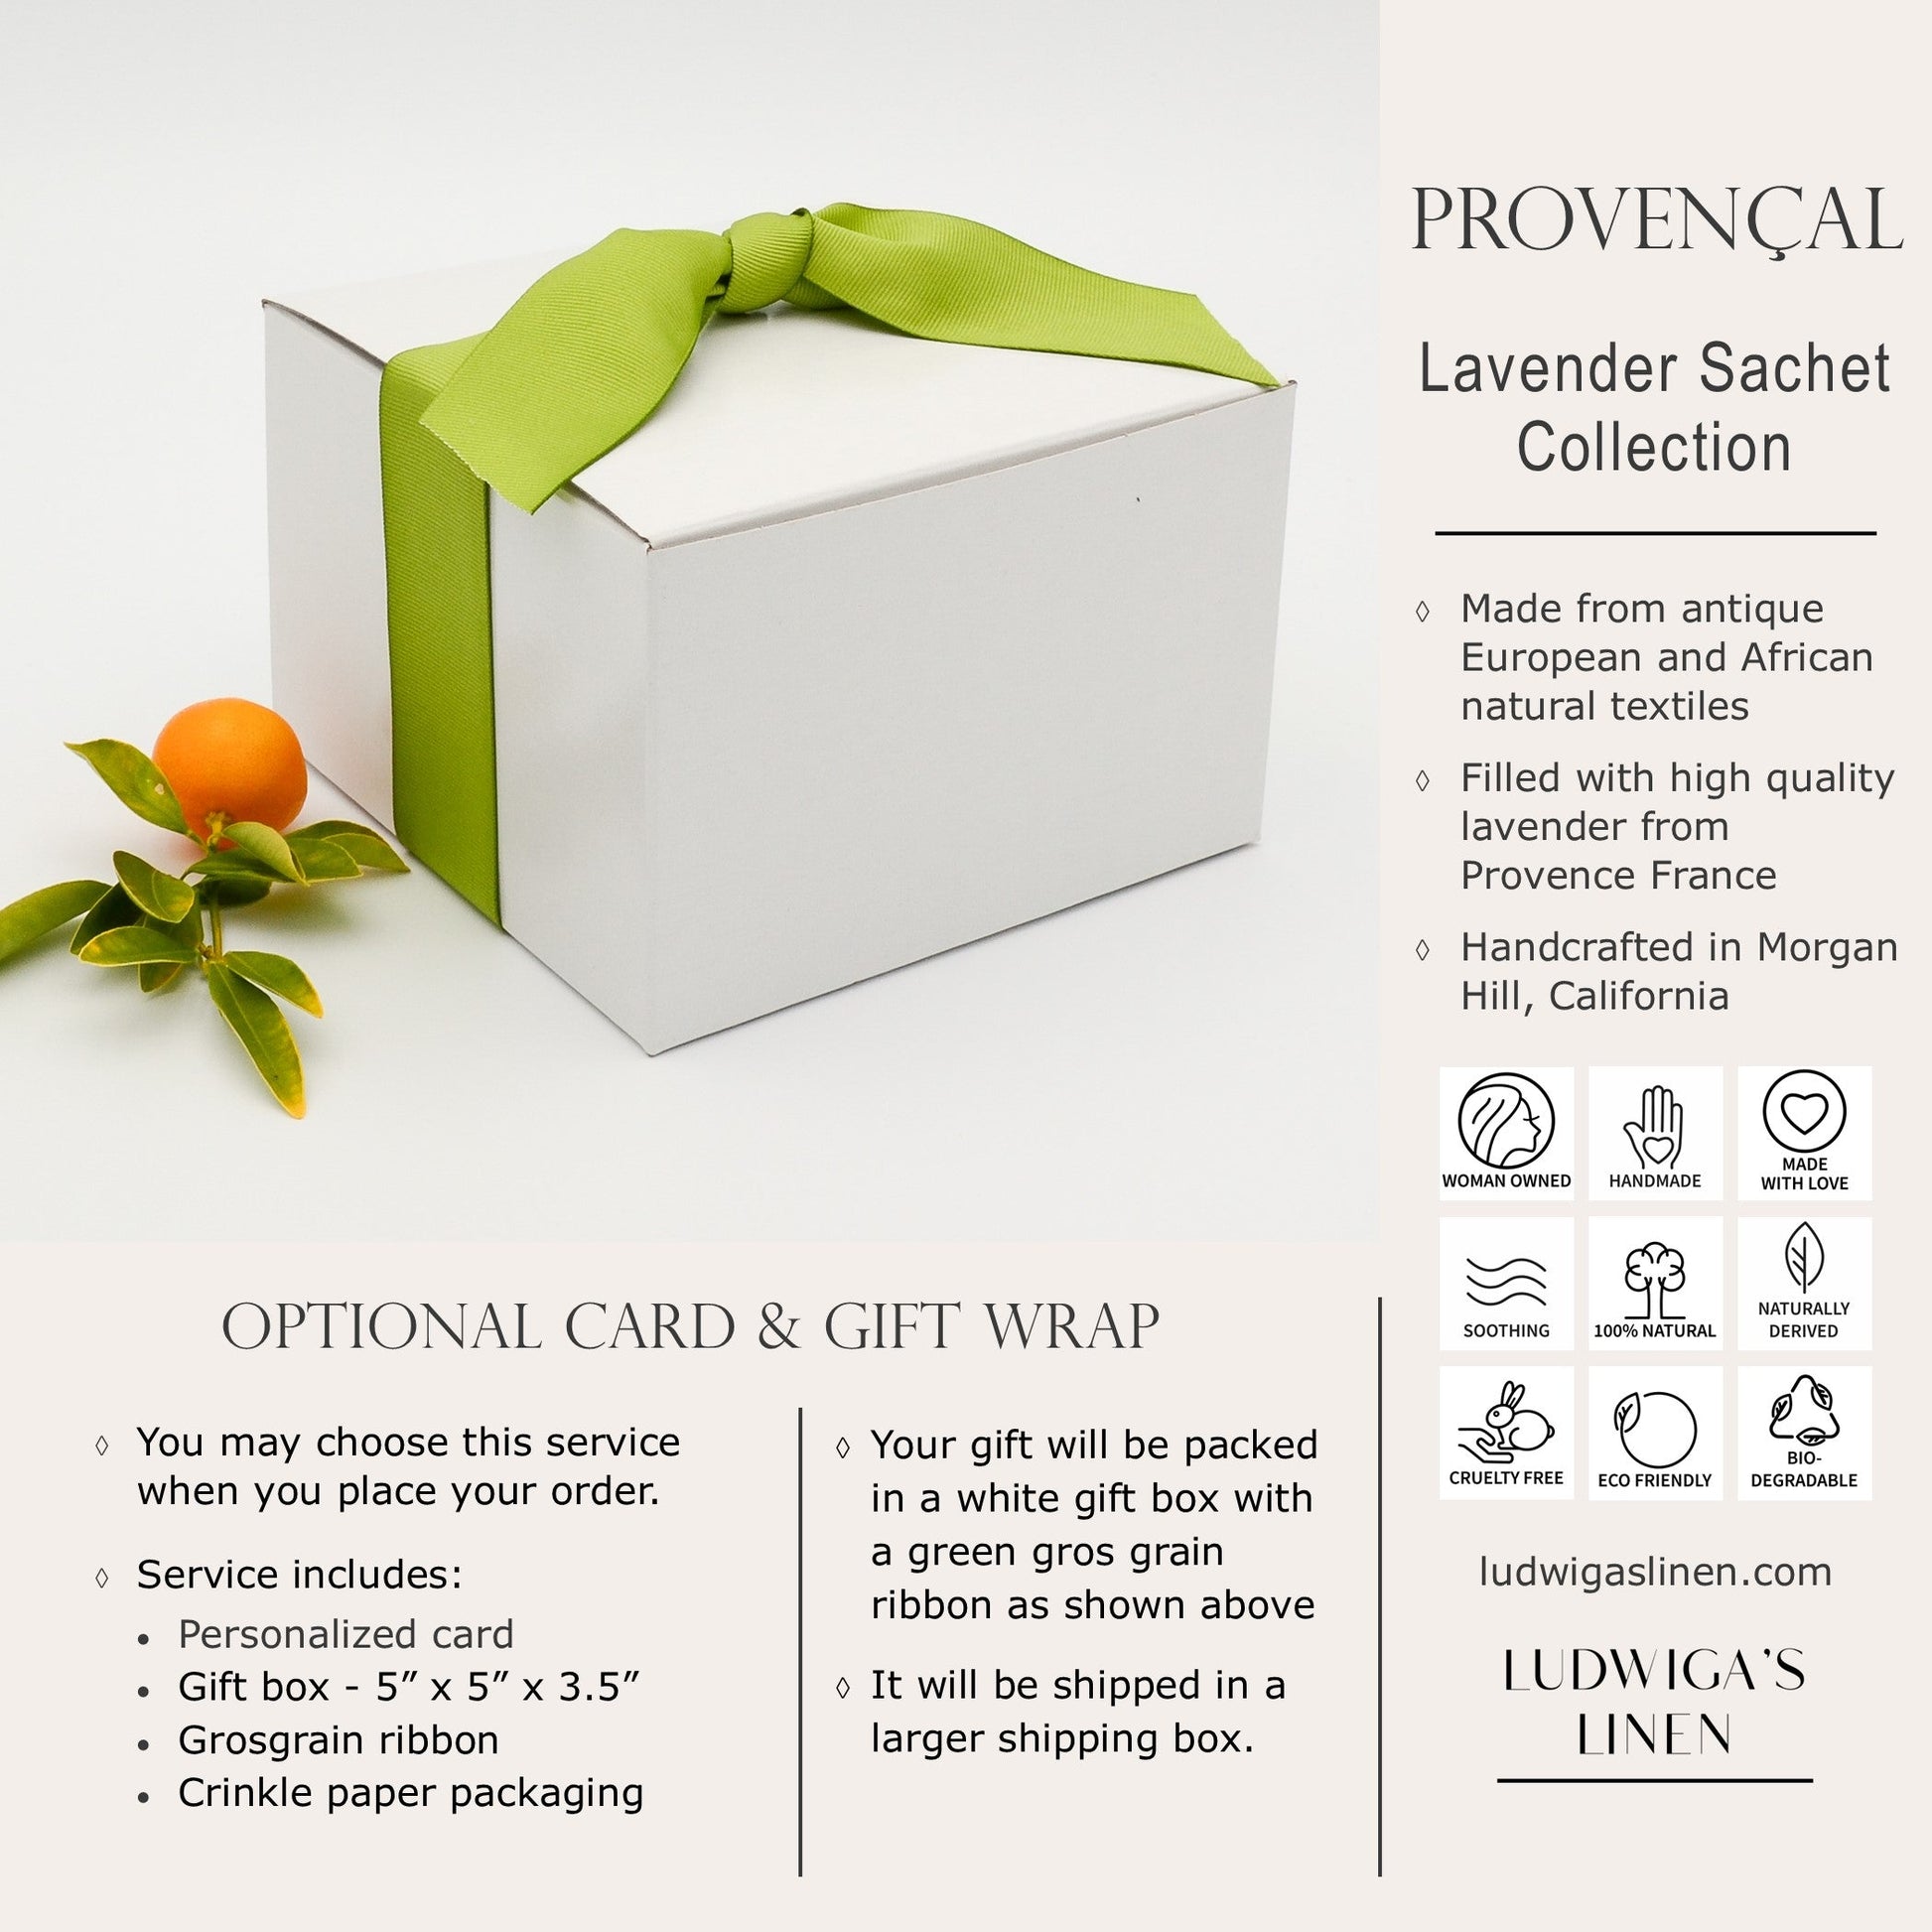 Optional gift box with green gros grain ribbon, information about Ludwiga's Linen Provençal sachet collection and shipping information